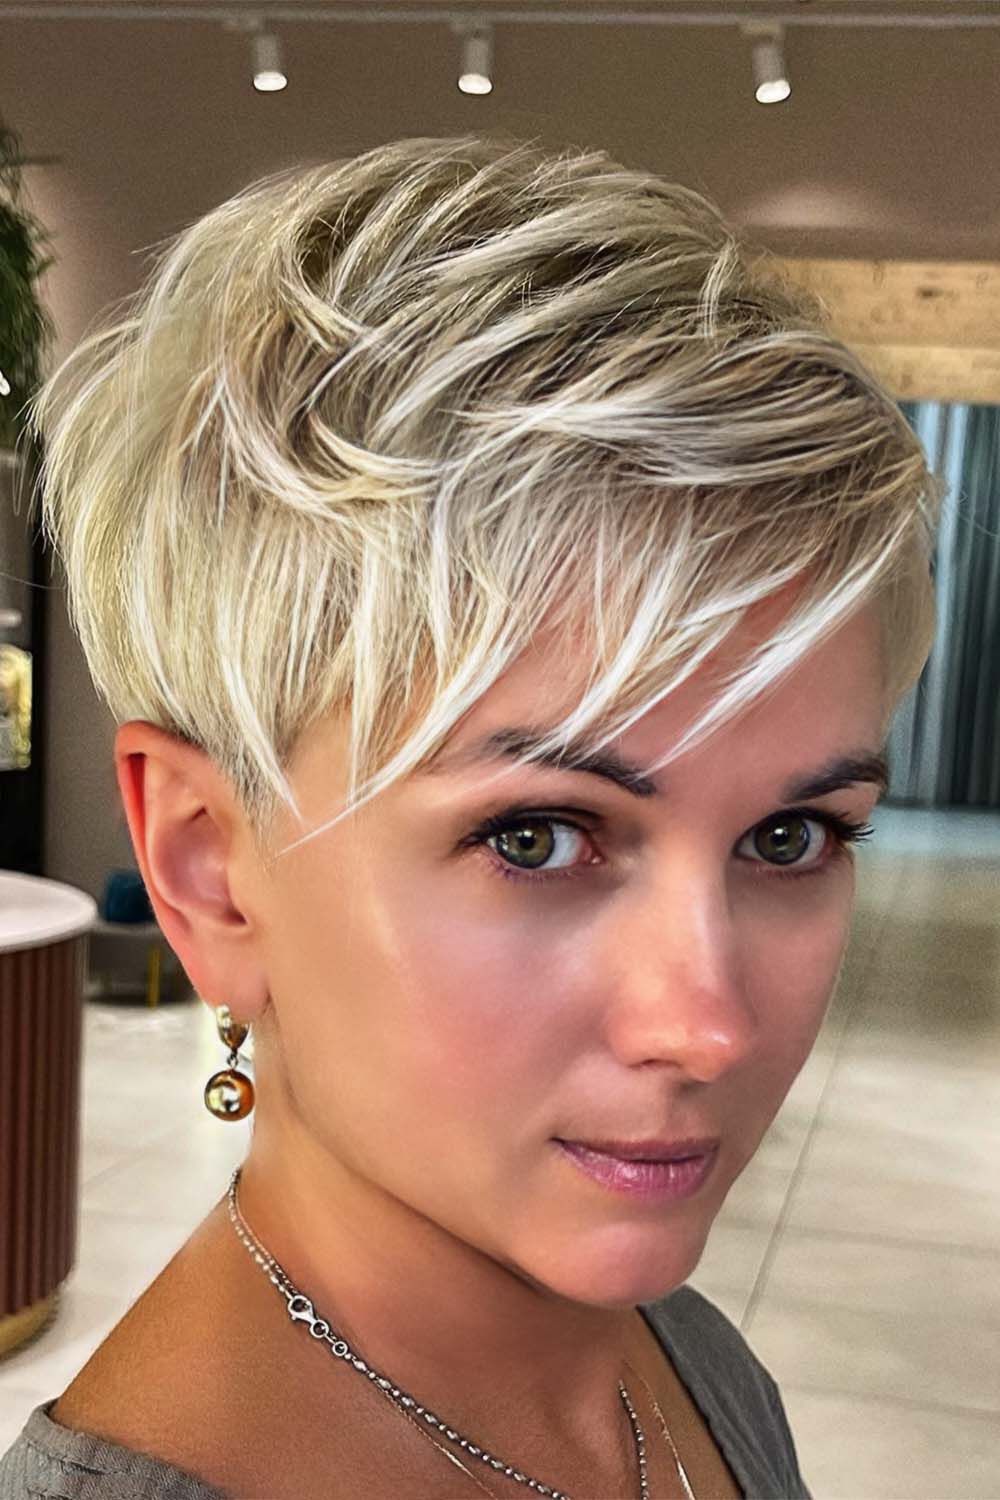 Here Are the 8 Best Short Haircuts for Every Face Shape